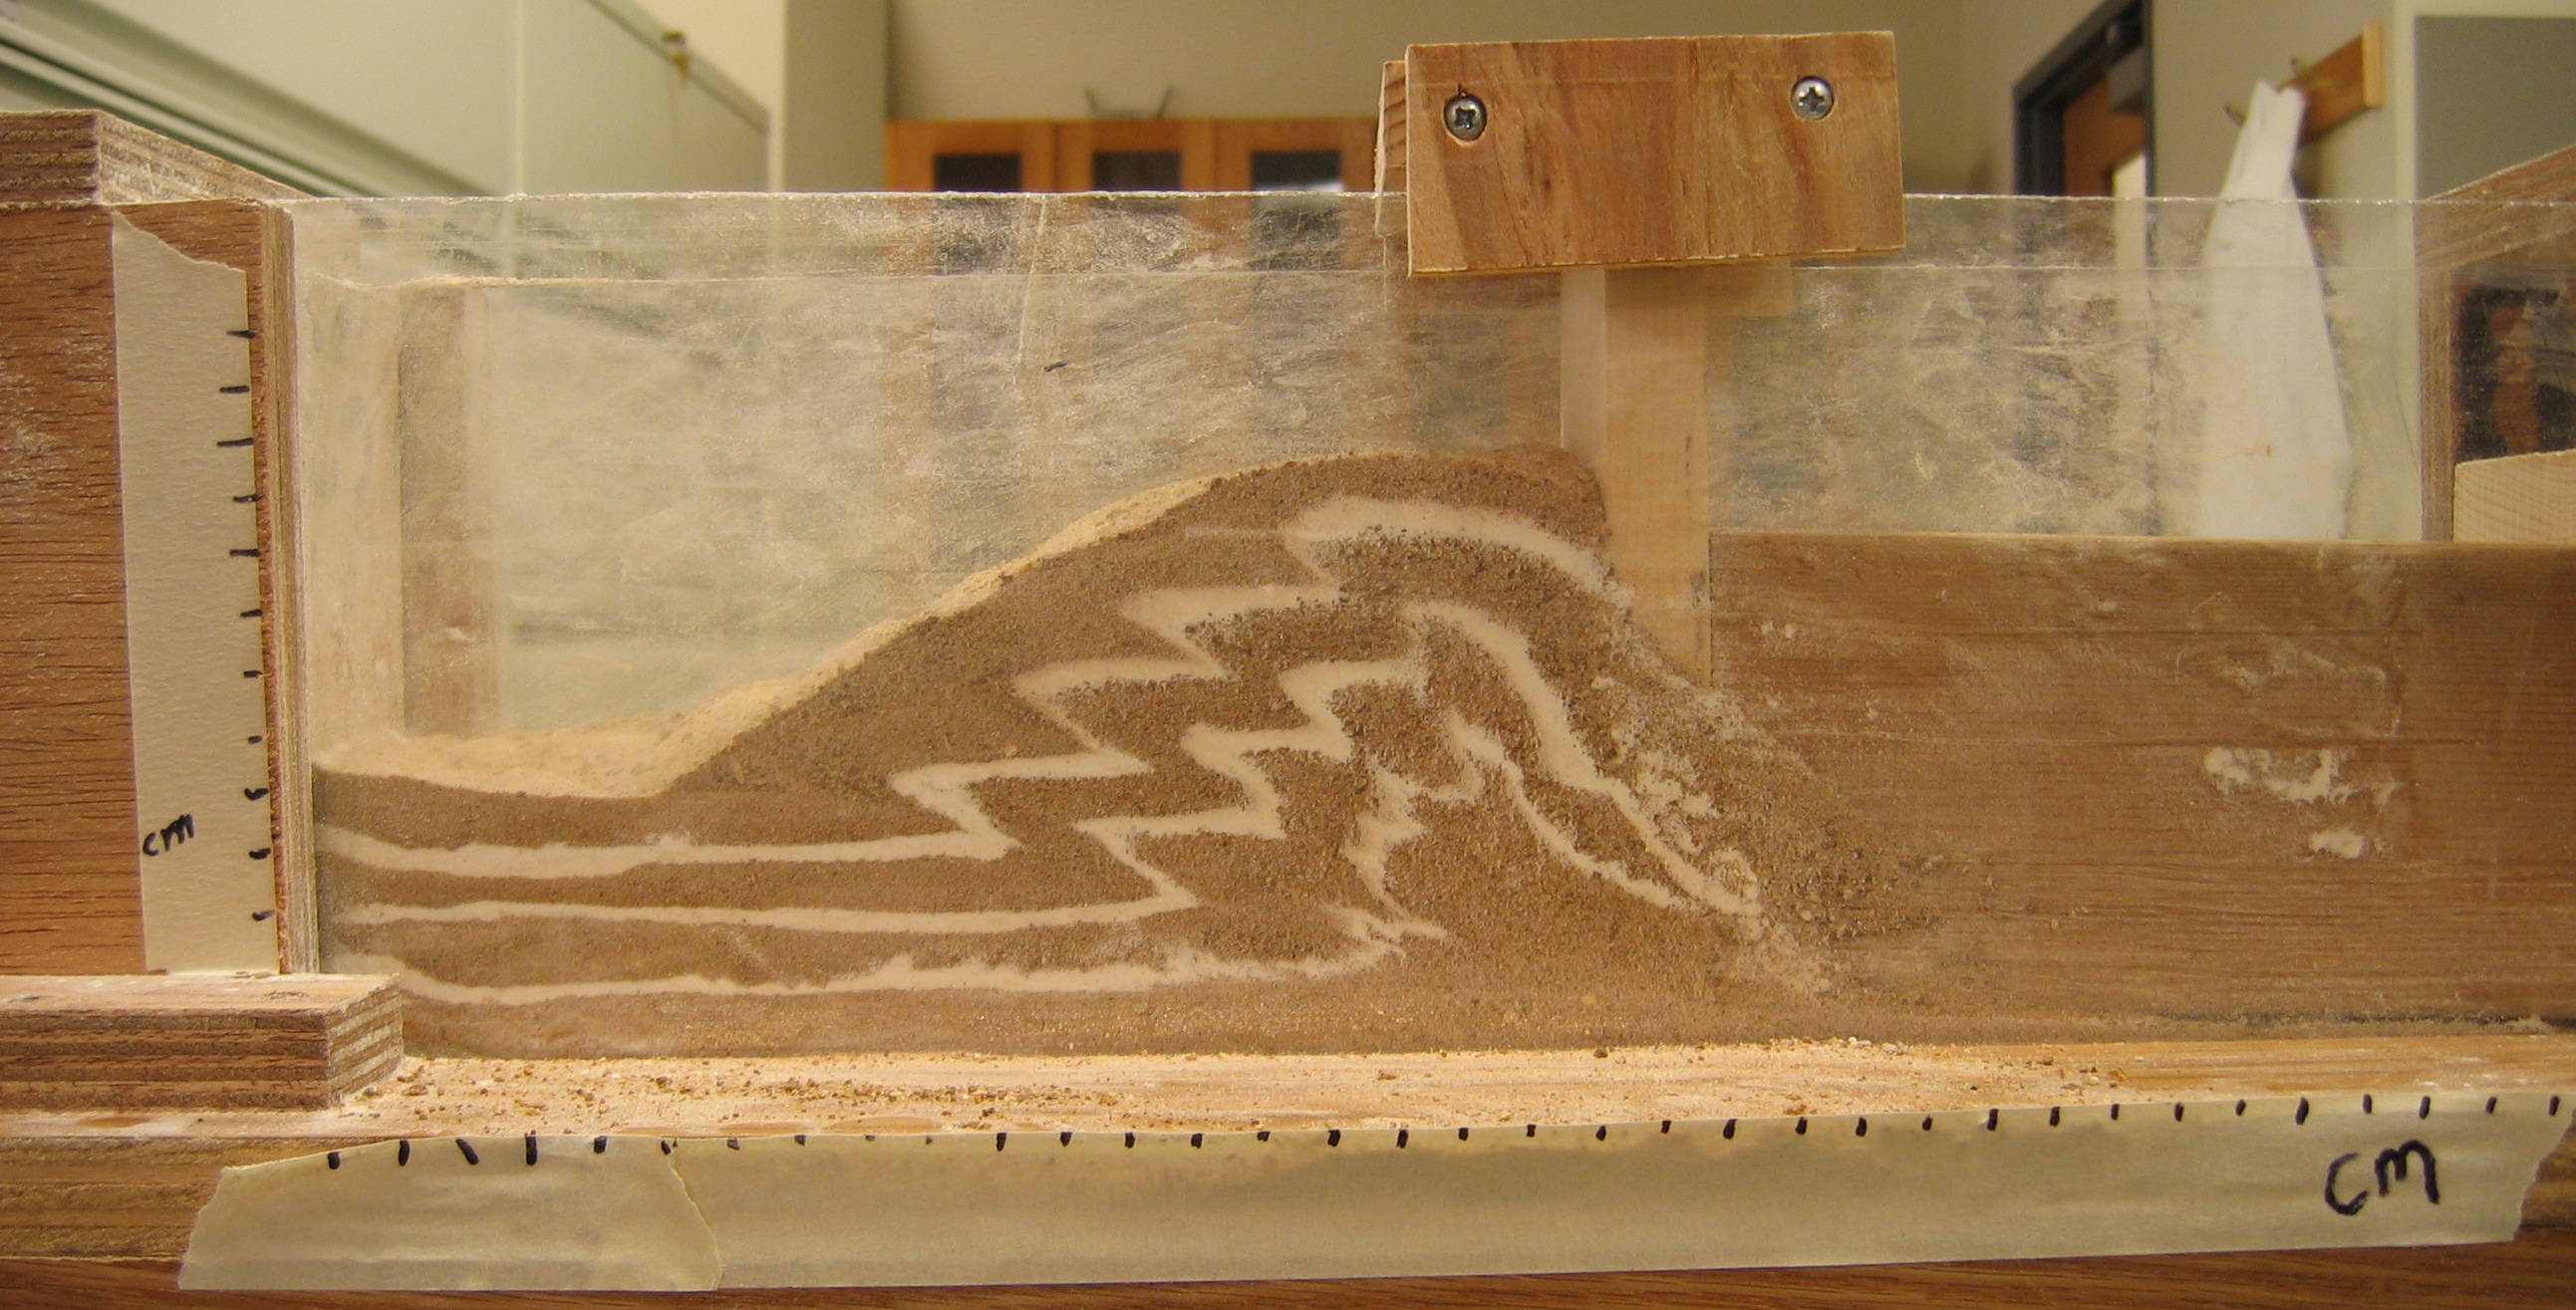 Layers of sand and flour demonstrating folds and faults due to compression